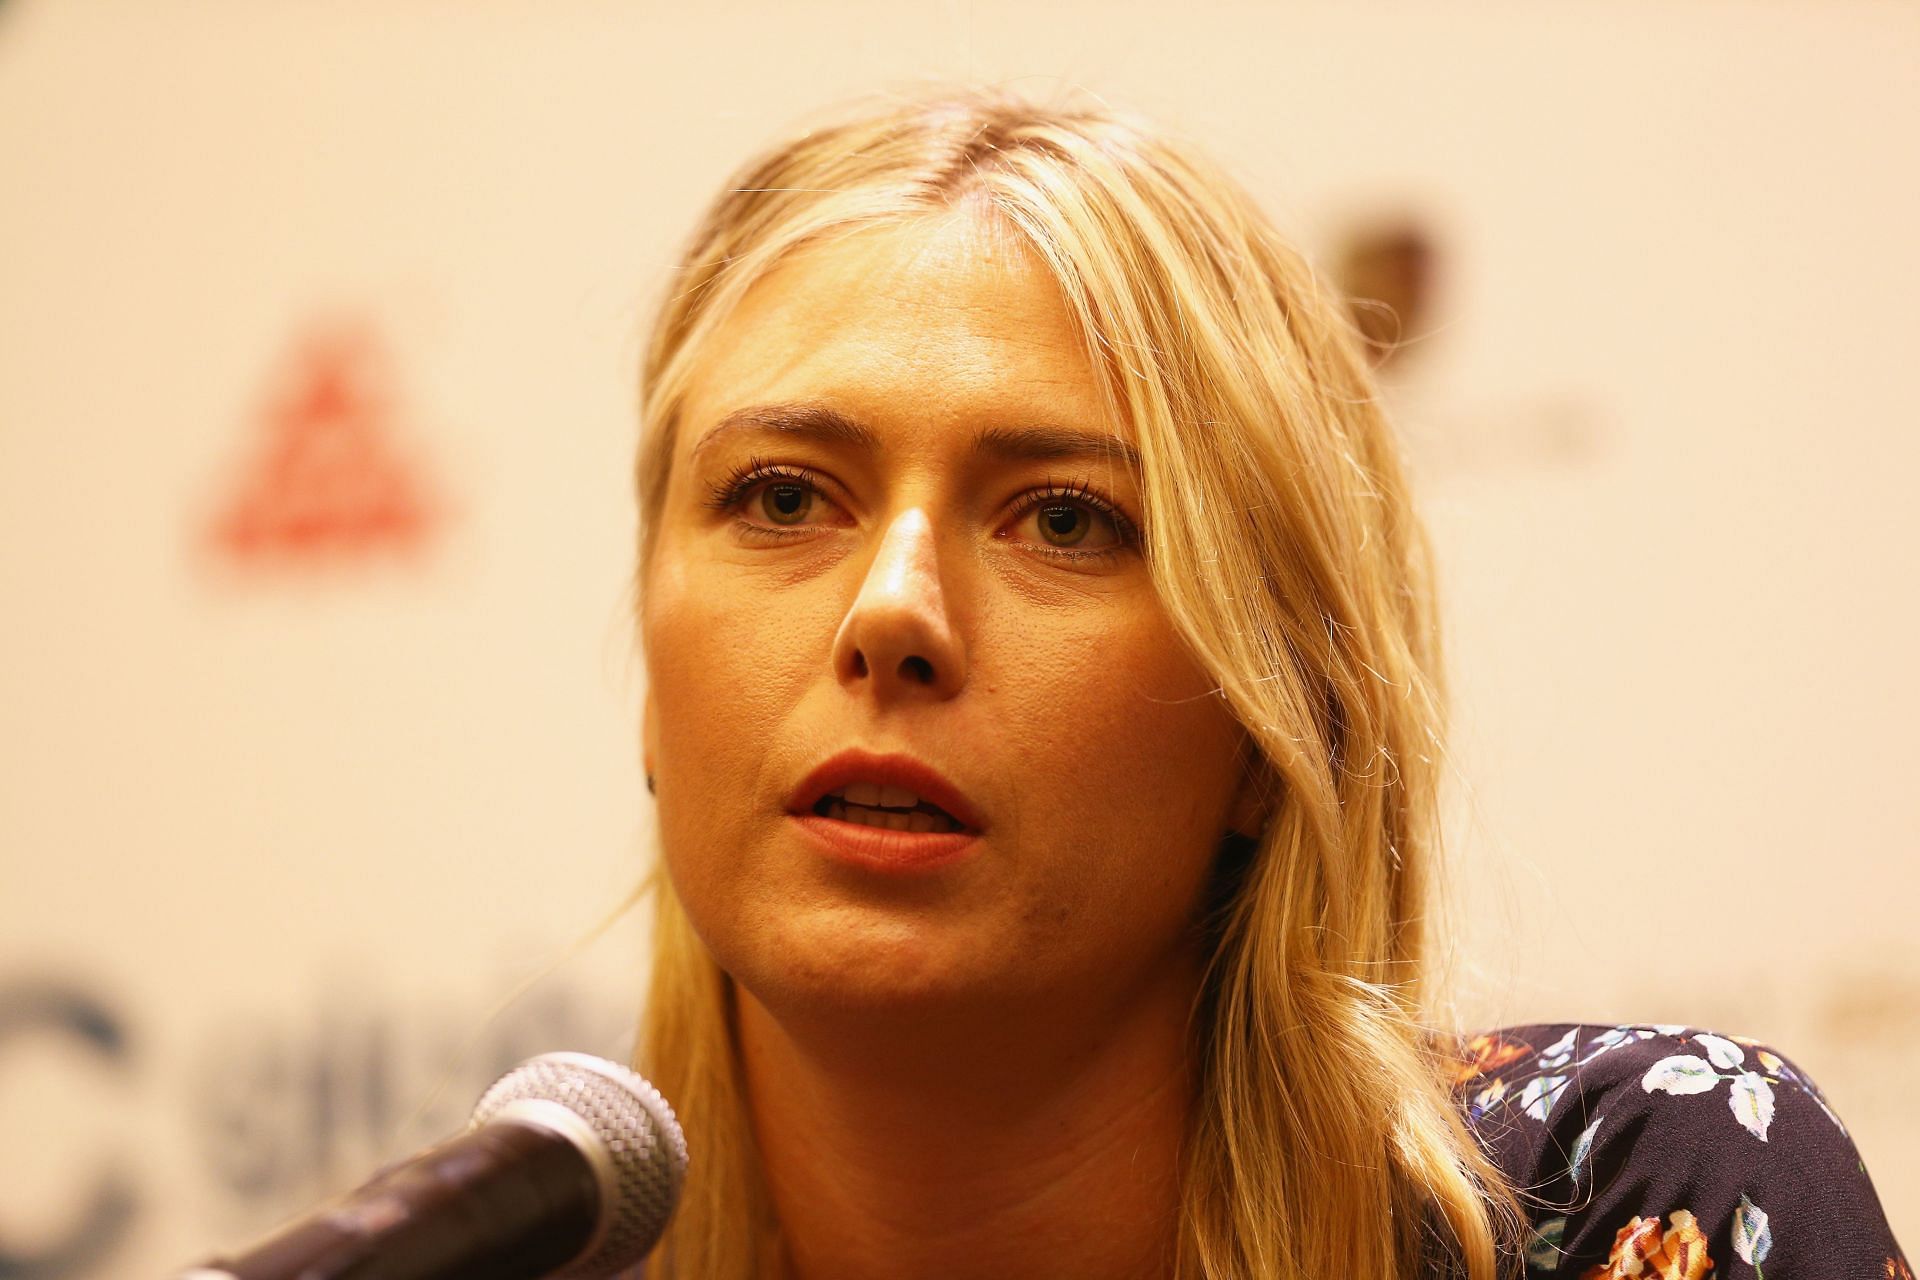 In pictures: Maria Sharapova steals the show in a stunning green gown ...